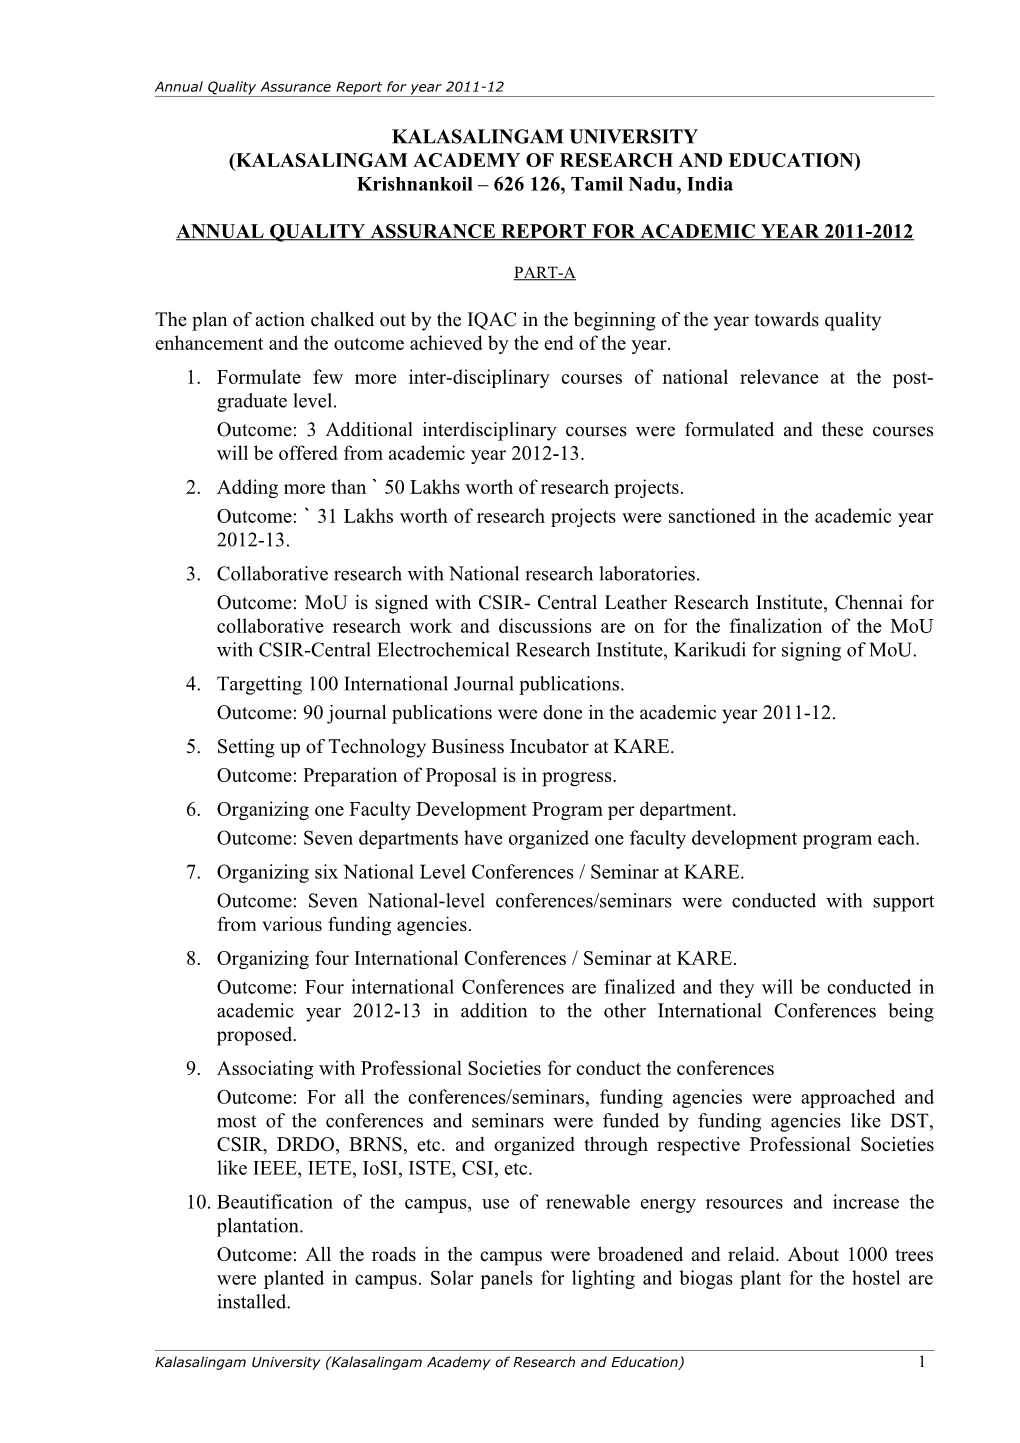 Annual Quality Assurance Report (2011-2012)